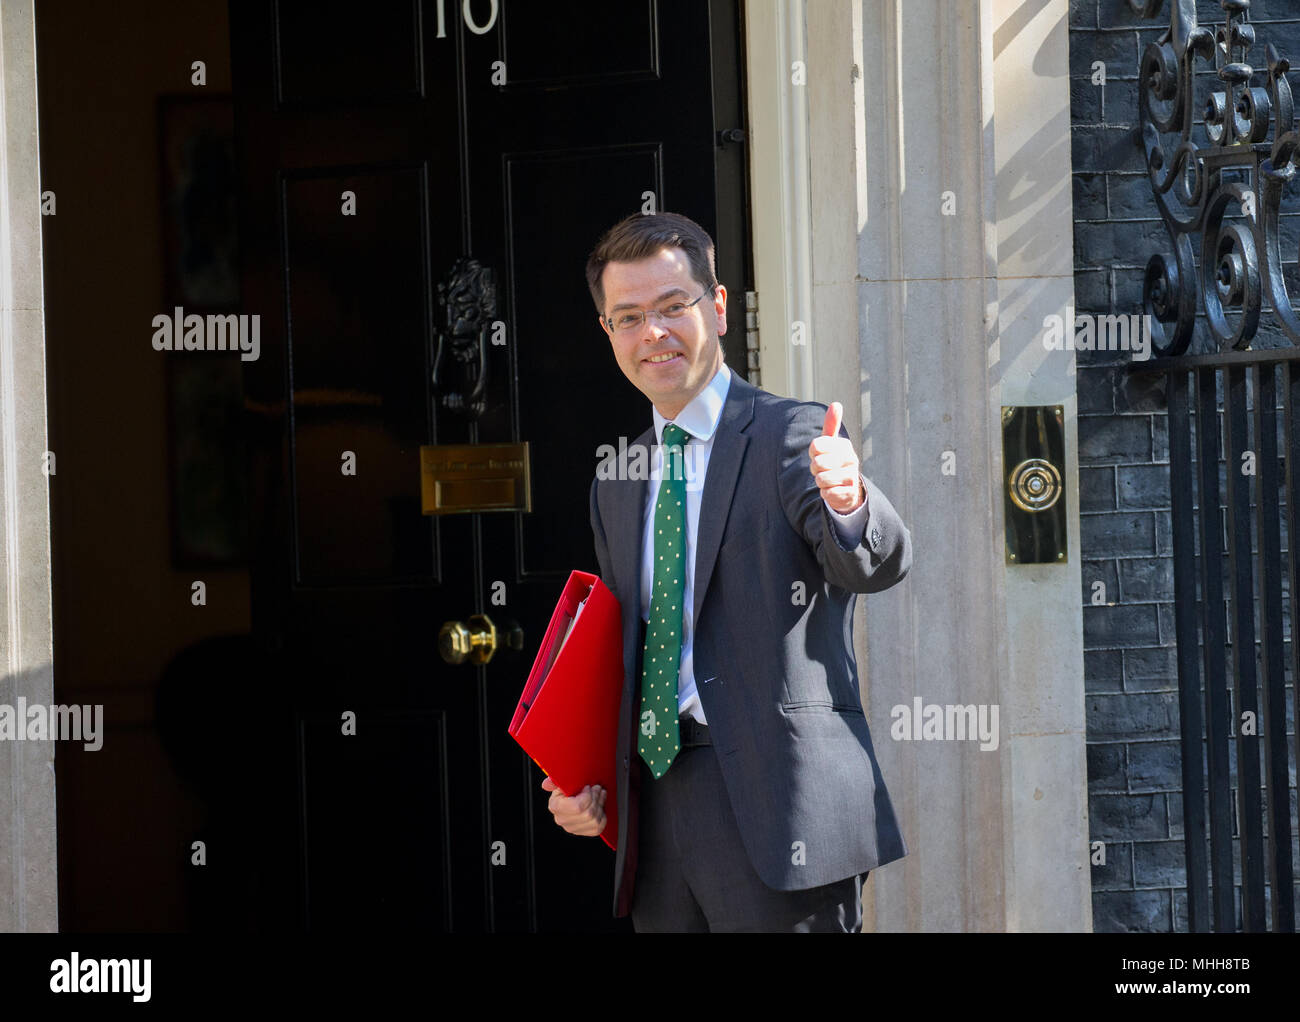 Secretary of State for Housing, Communities and Local Government, James Brokenshire, returns to Cabinet after surgery for a lesion on his lung. Stock Photo